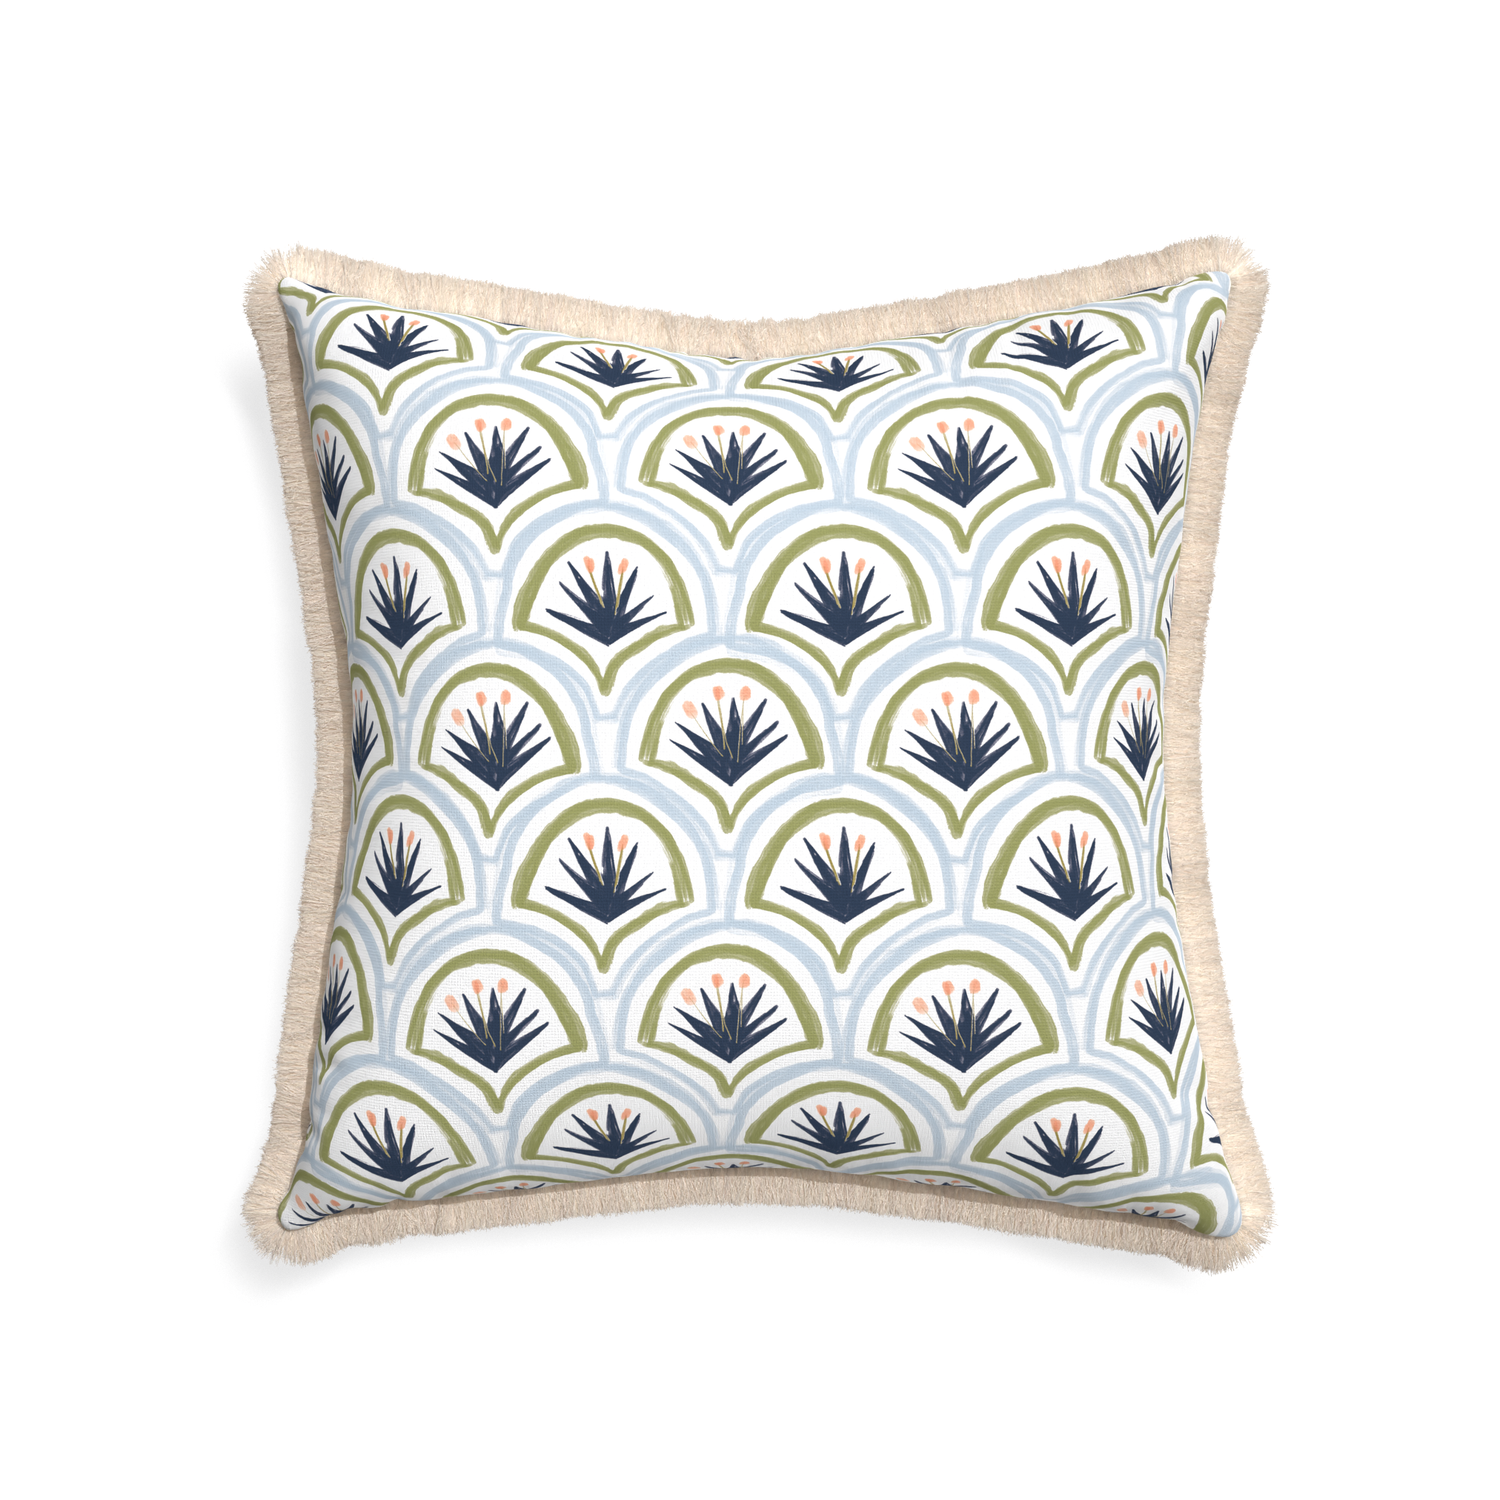 22-square thatcher midnight custom art deco palm patternpillow with cream fringe on white background